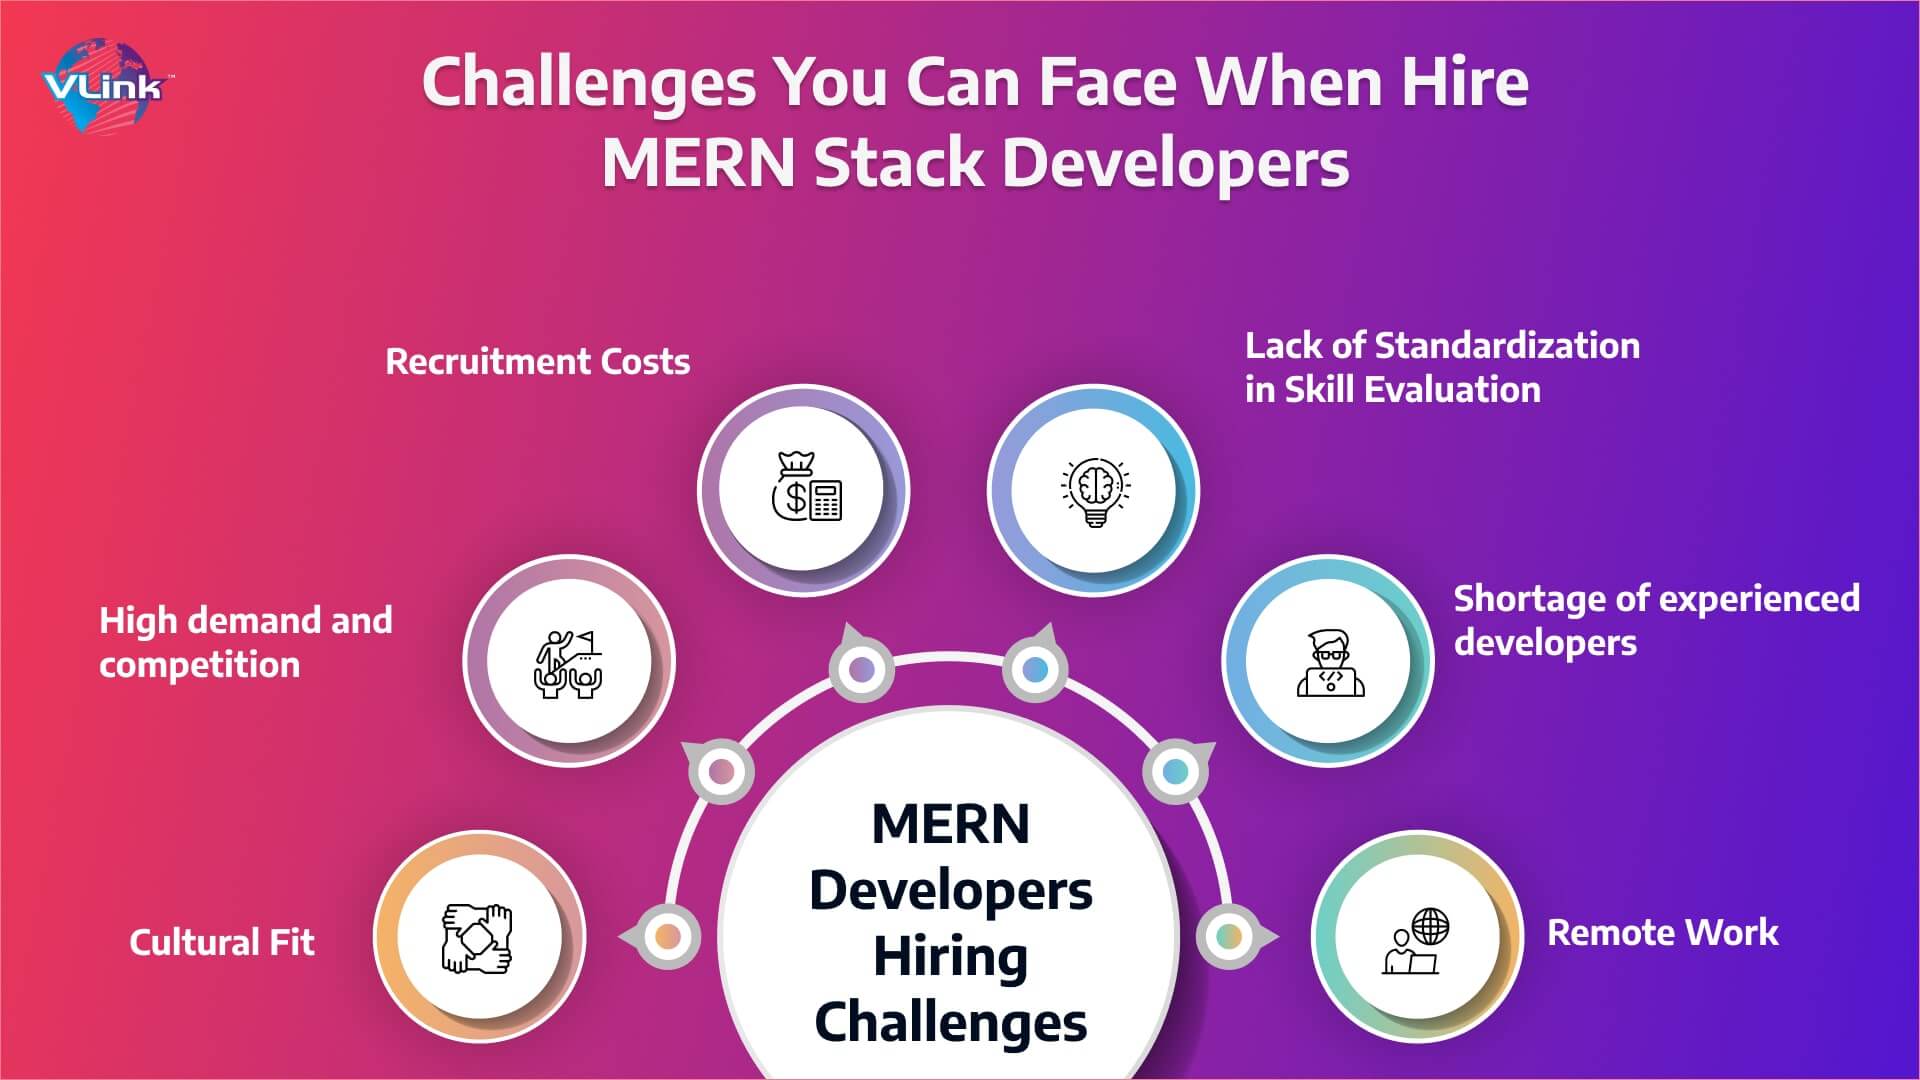 challenges you can face when hiring experienced MERN stack developers